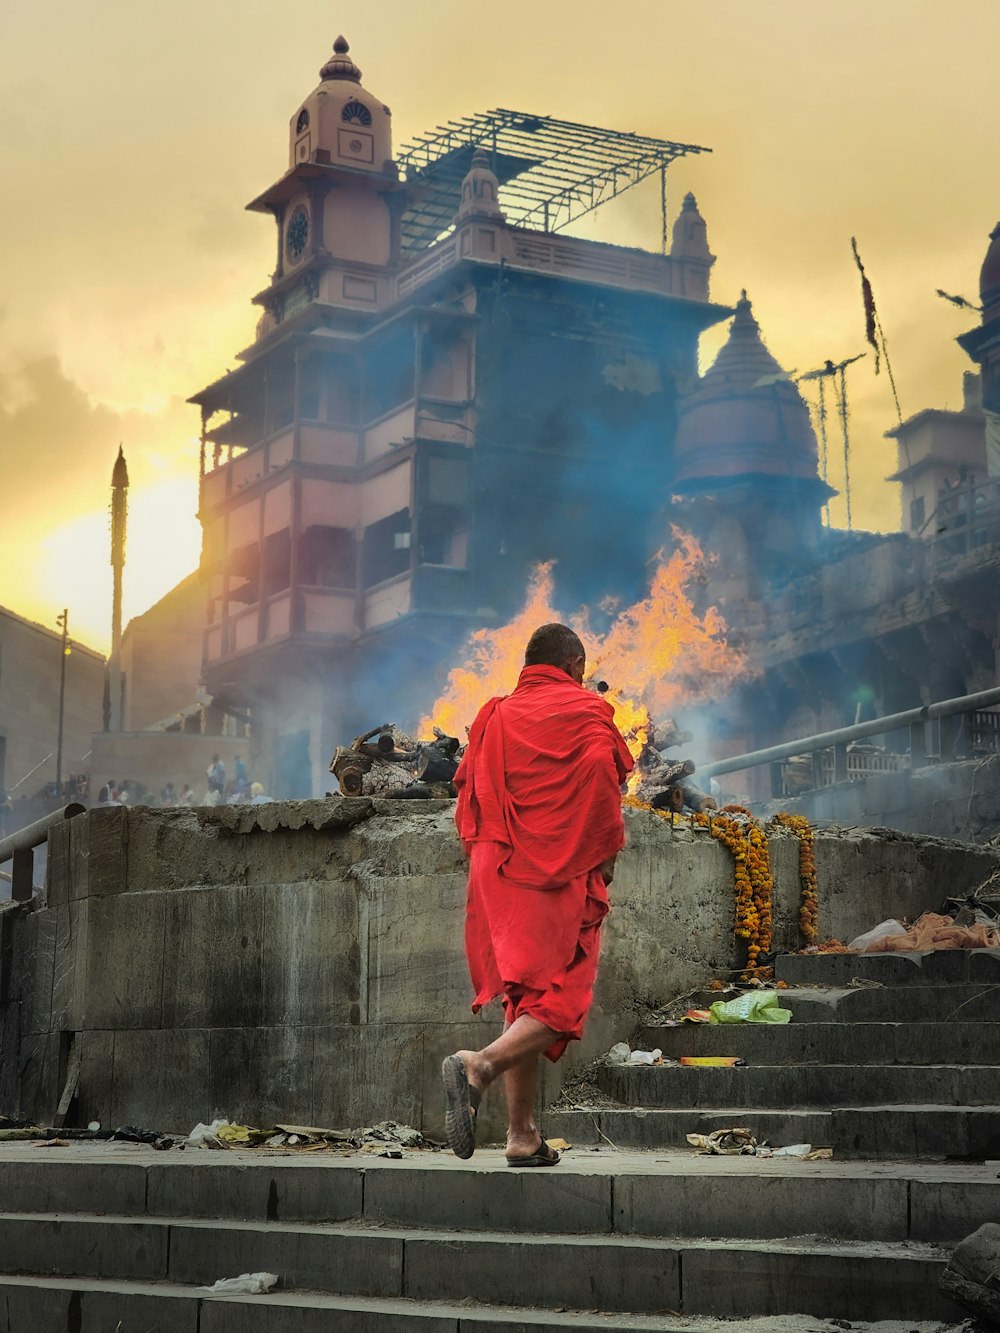 a man in a red robe walking up some steps